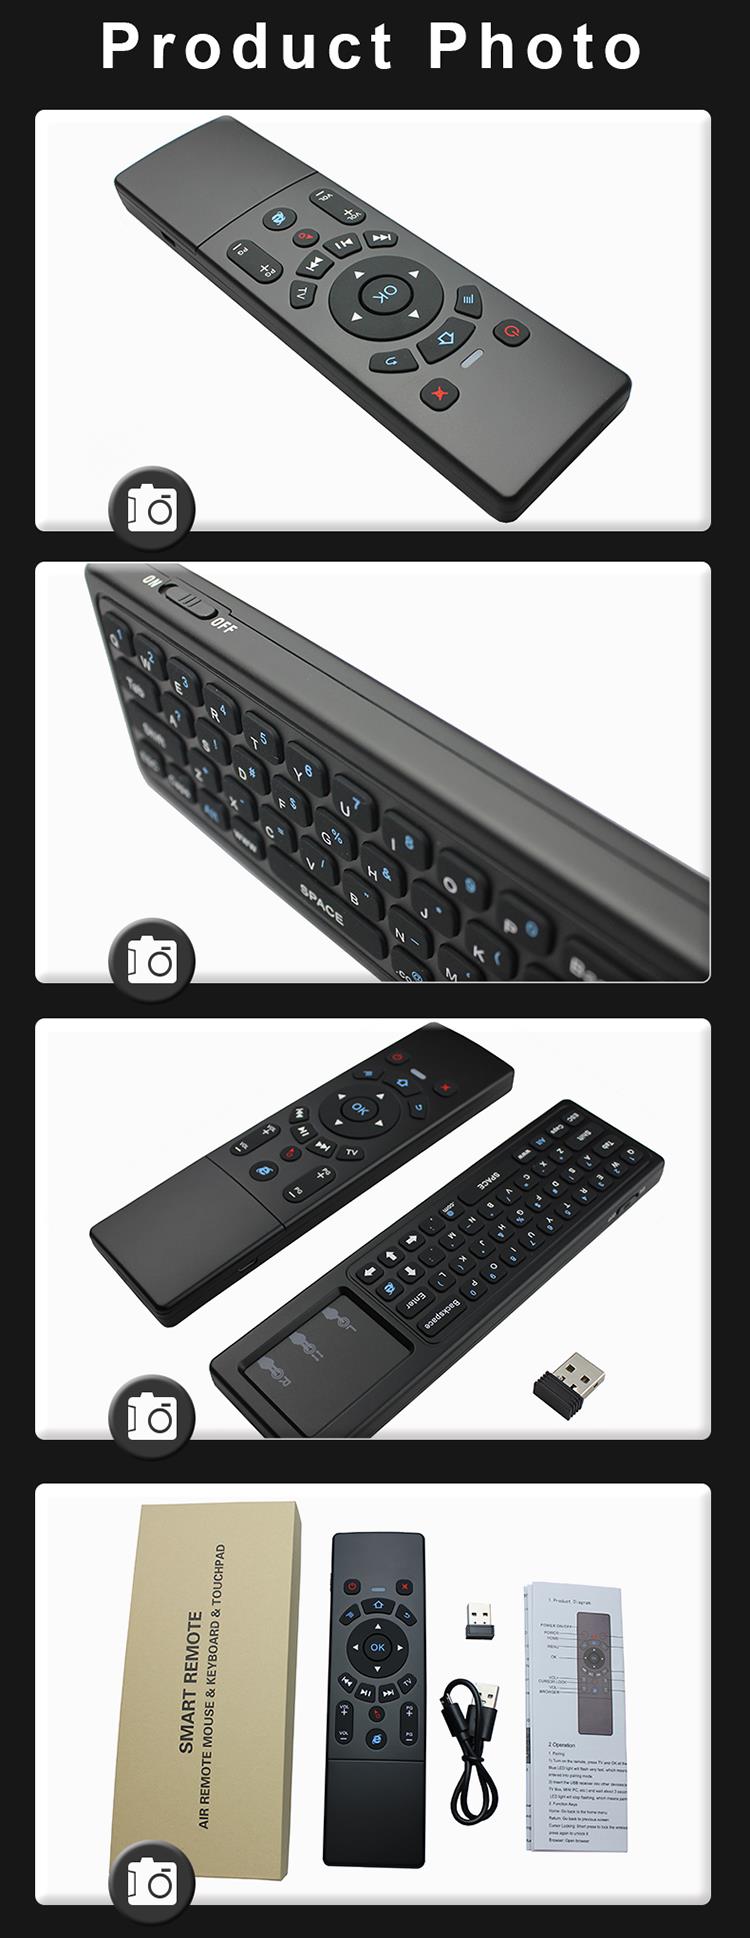 T6 2.4G Wireless Air Mouse Keyboard With Touchpad IR Learning For Android TV Box/Xbox/PC/Smart TV 18